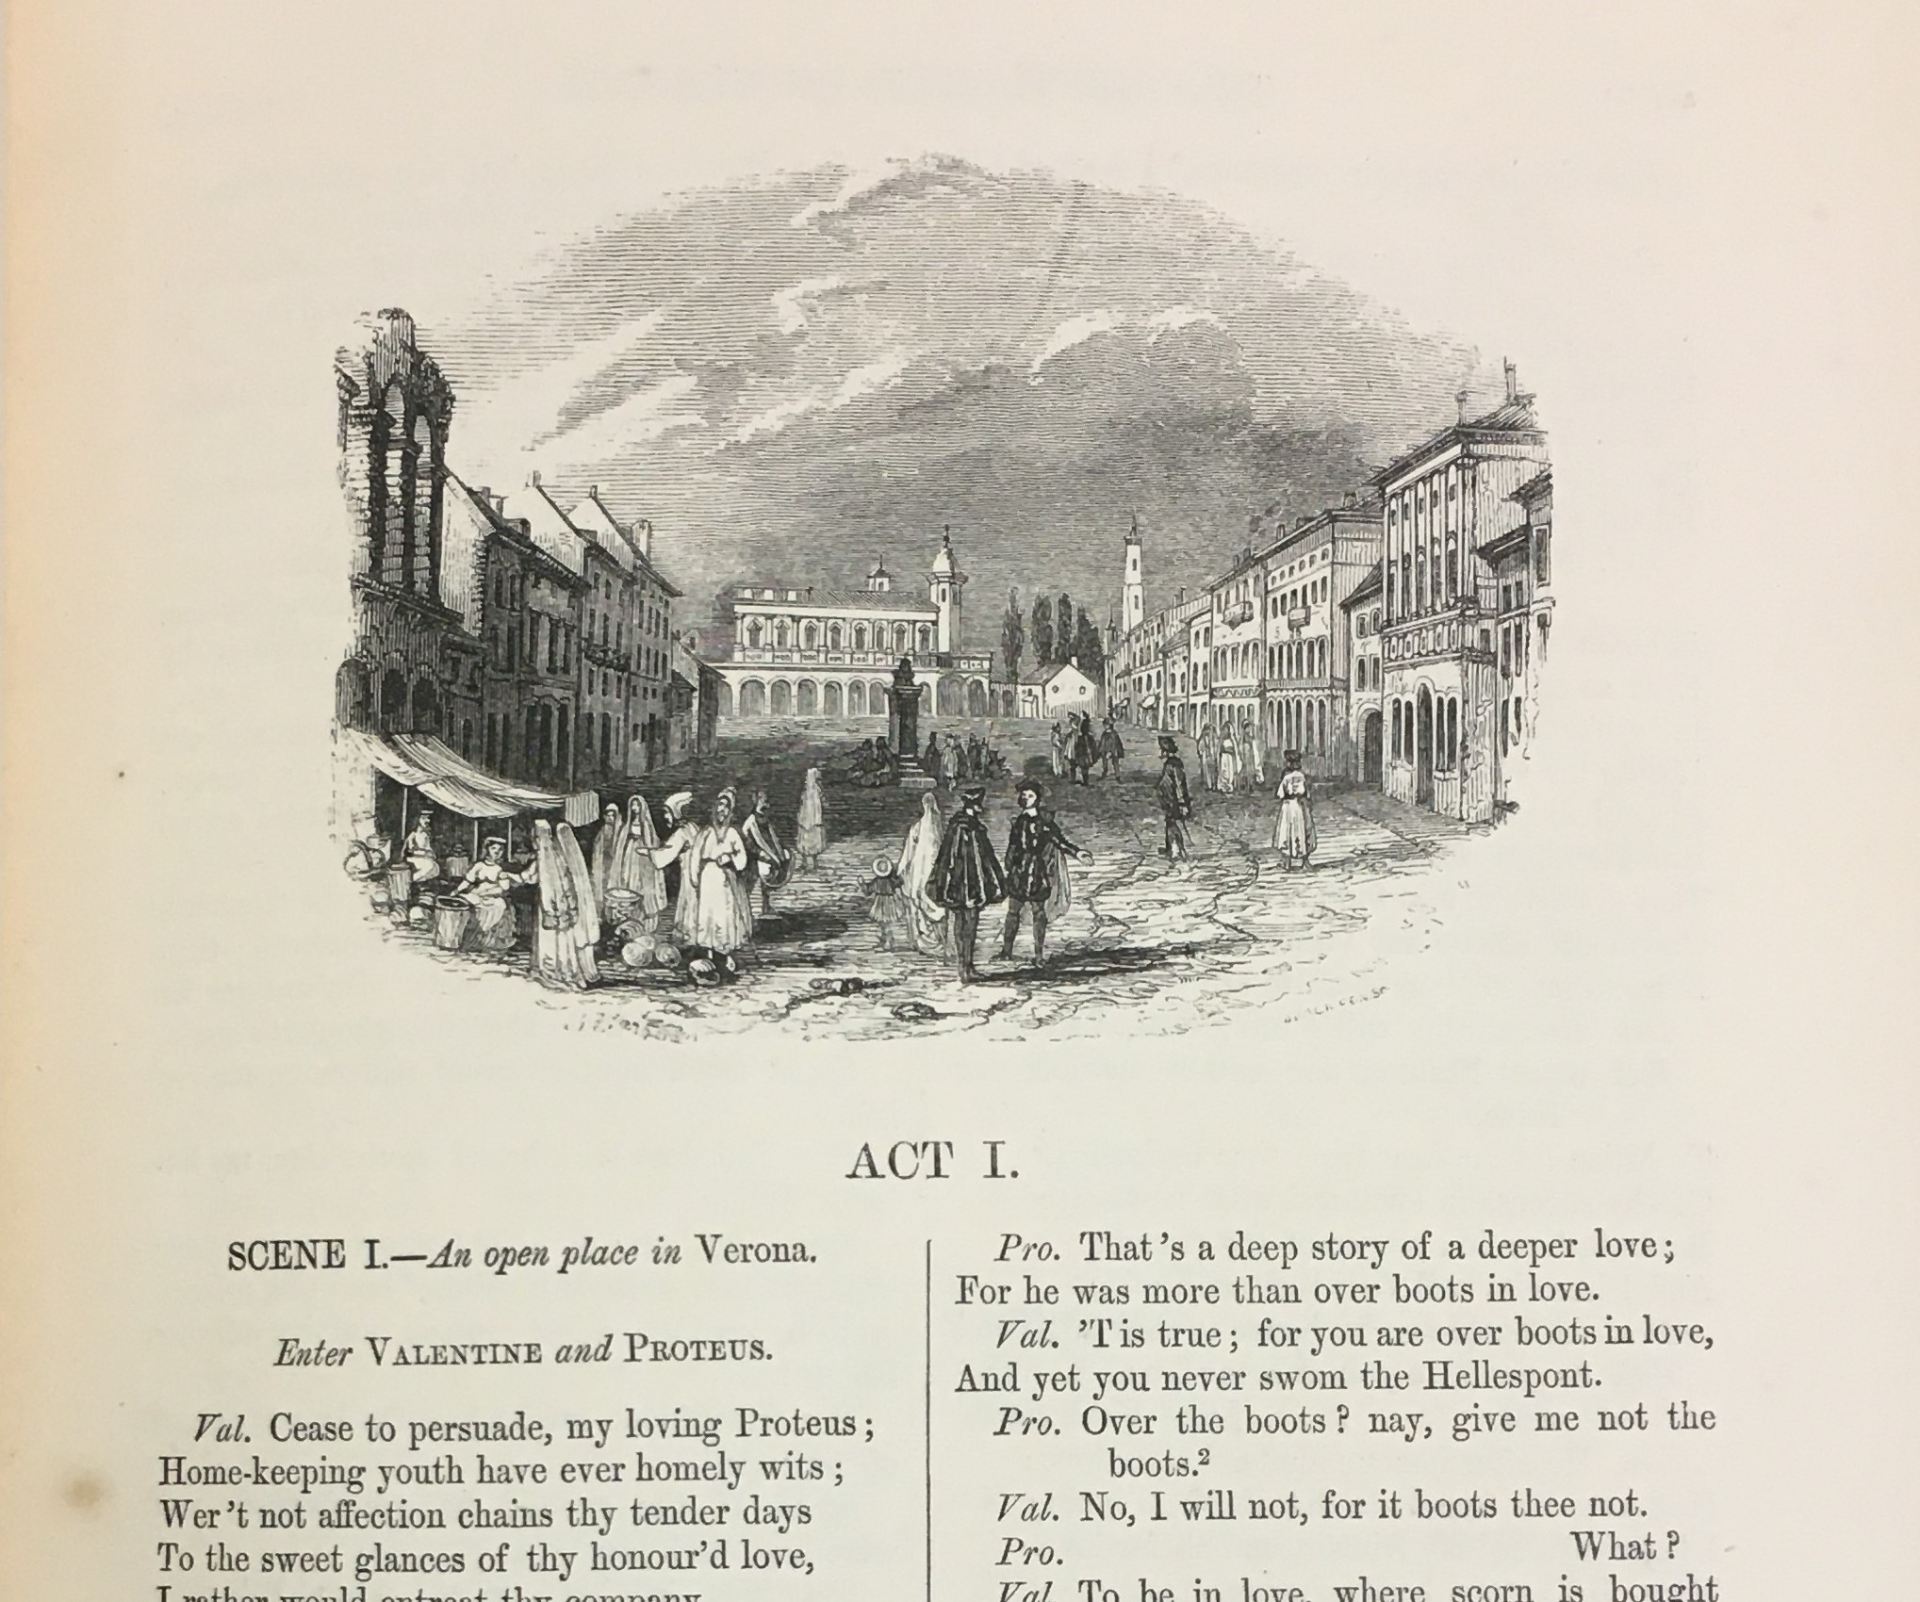 Act I of 'The Two Gentlemen of Verona' from Charles Knight’s Standard Edition of the Pictorial Shakspeare, Vol. I.